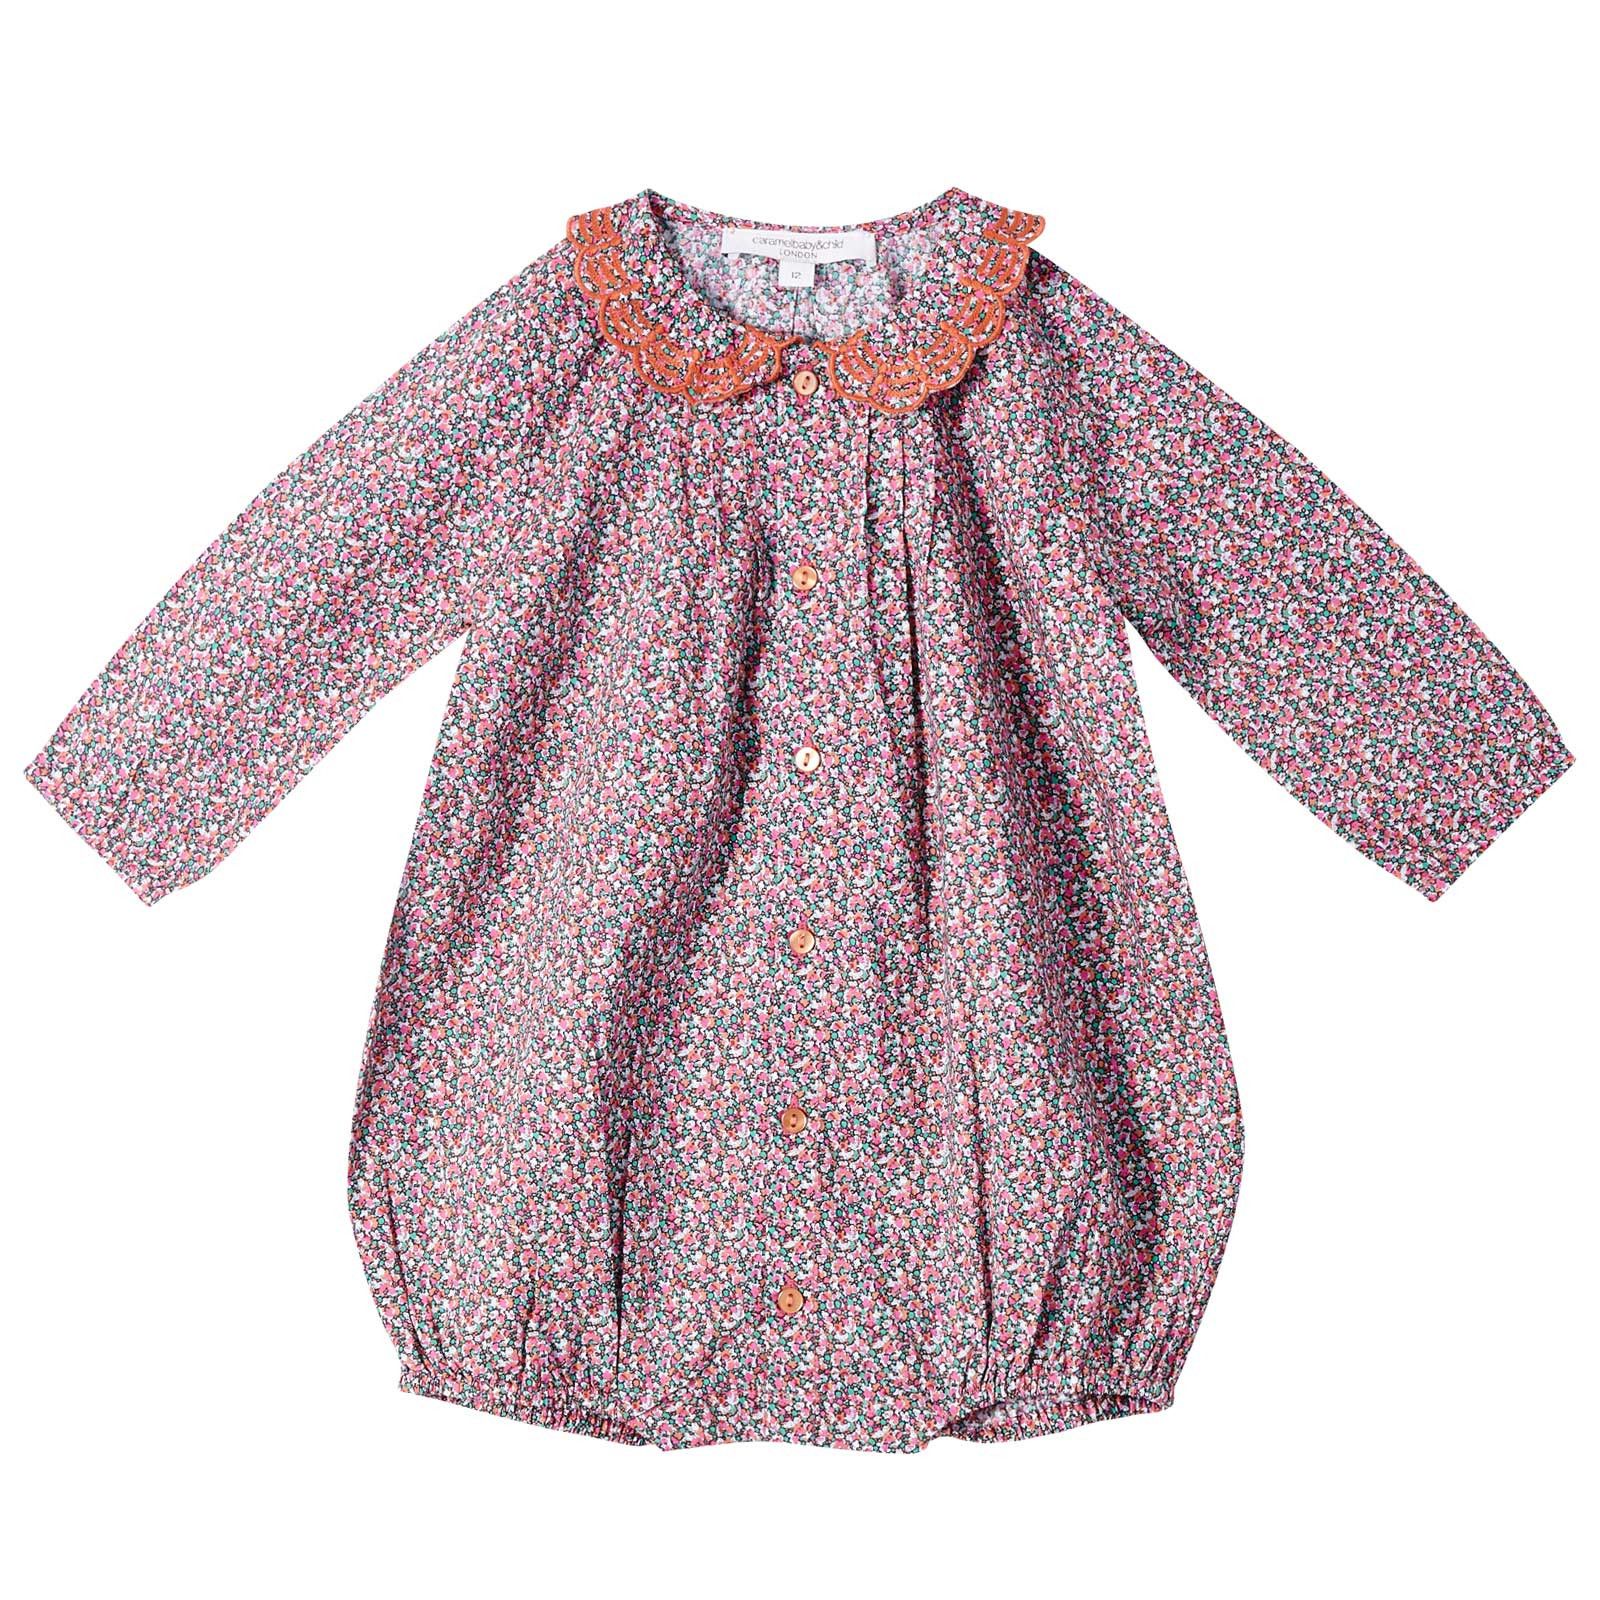 Baby Girls Pink Floral Romper With With Peter Pan Collar - CÉMAROSE | Children's Fashion Store - 1